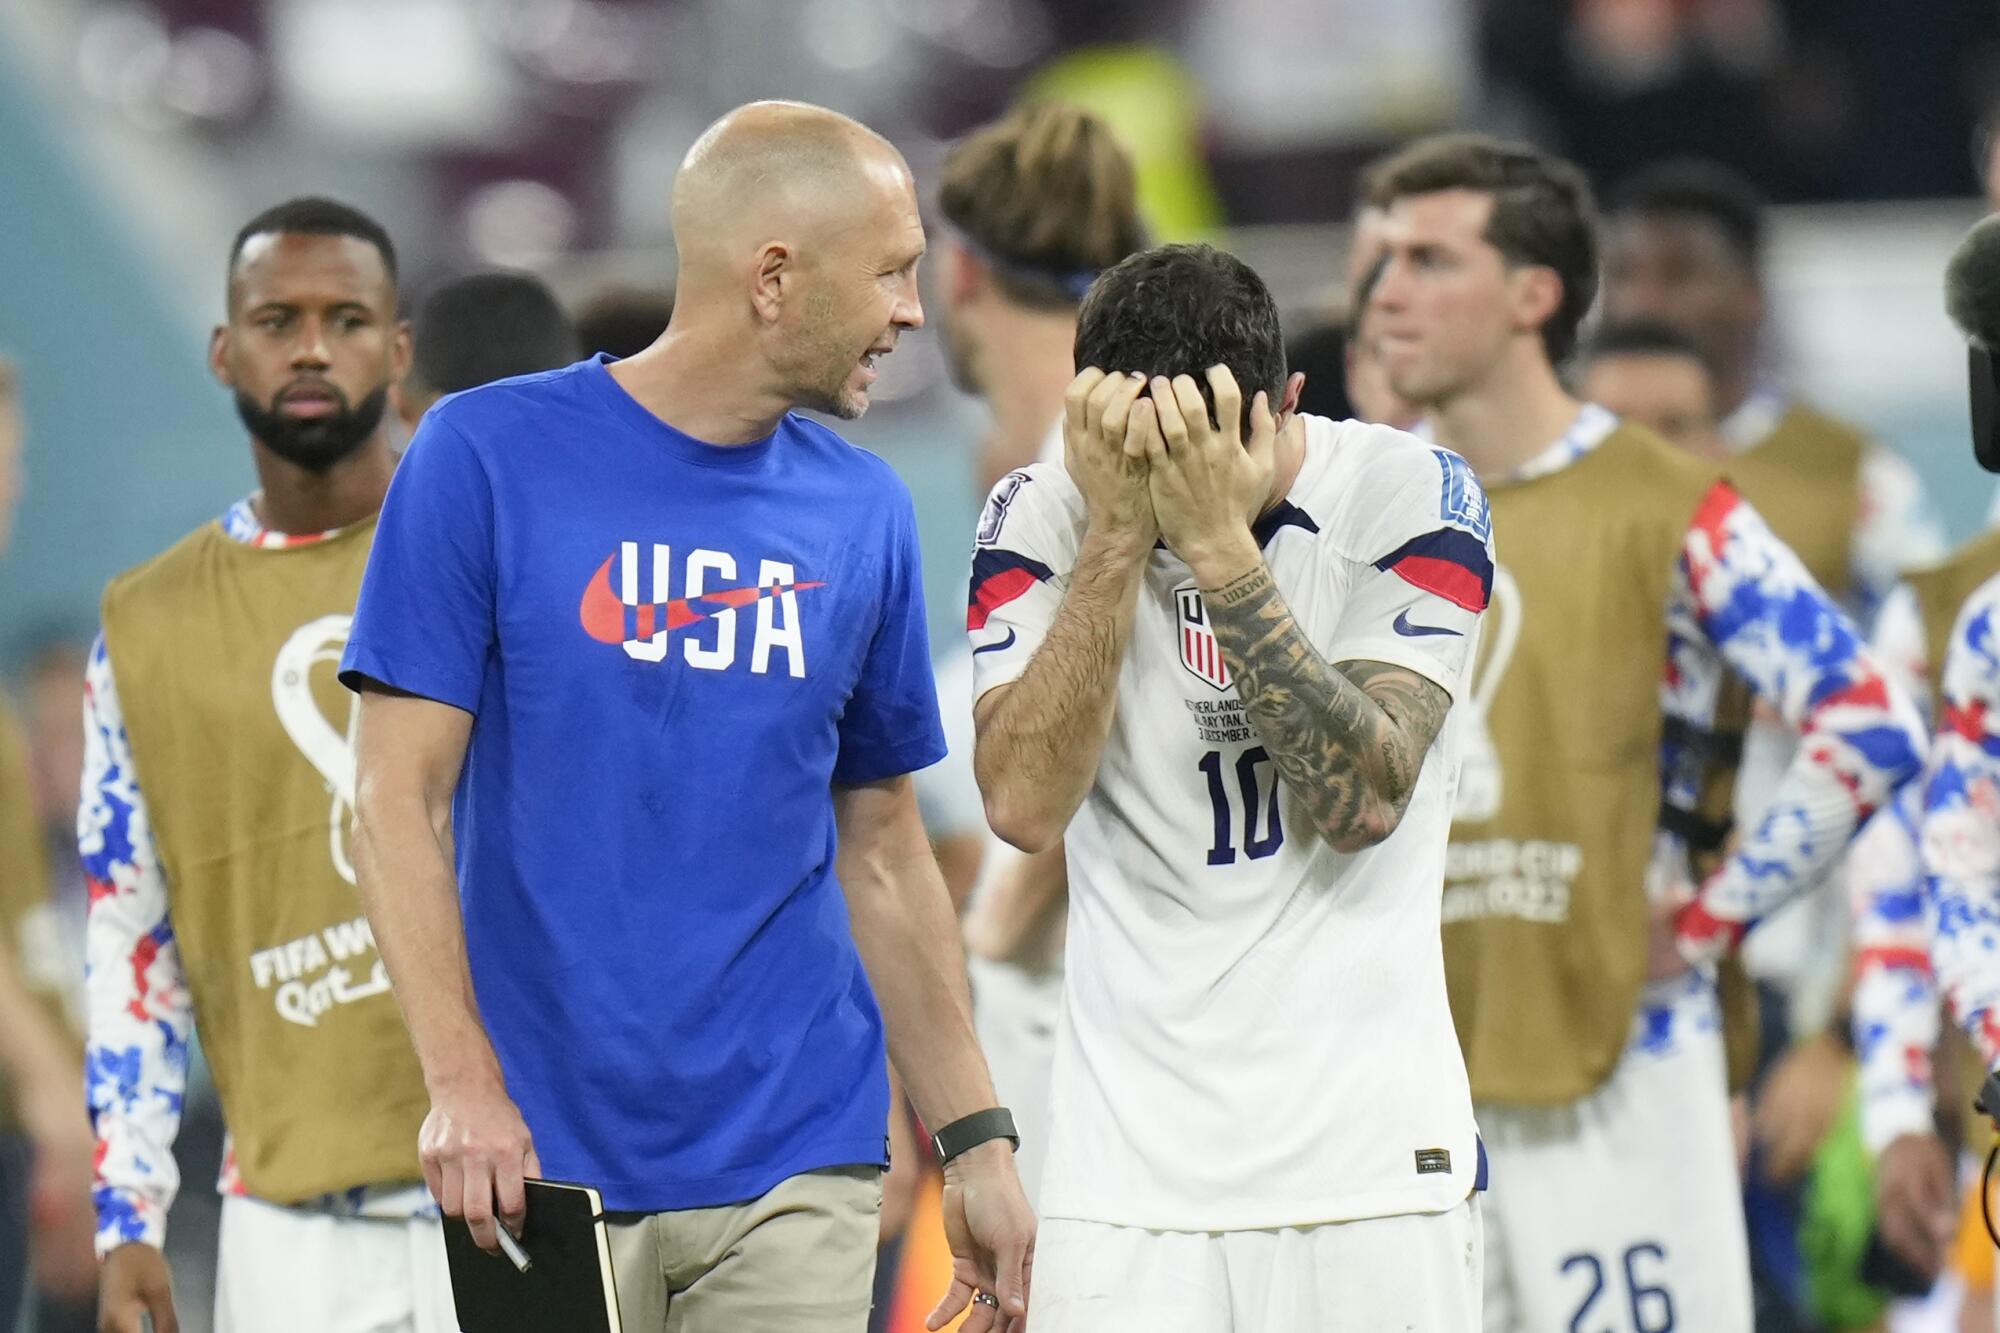 U.S. coach Gregg Berhalter turns to address someone while Christian Pulisic covers his face as they leave the field.